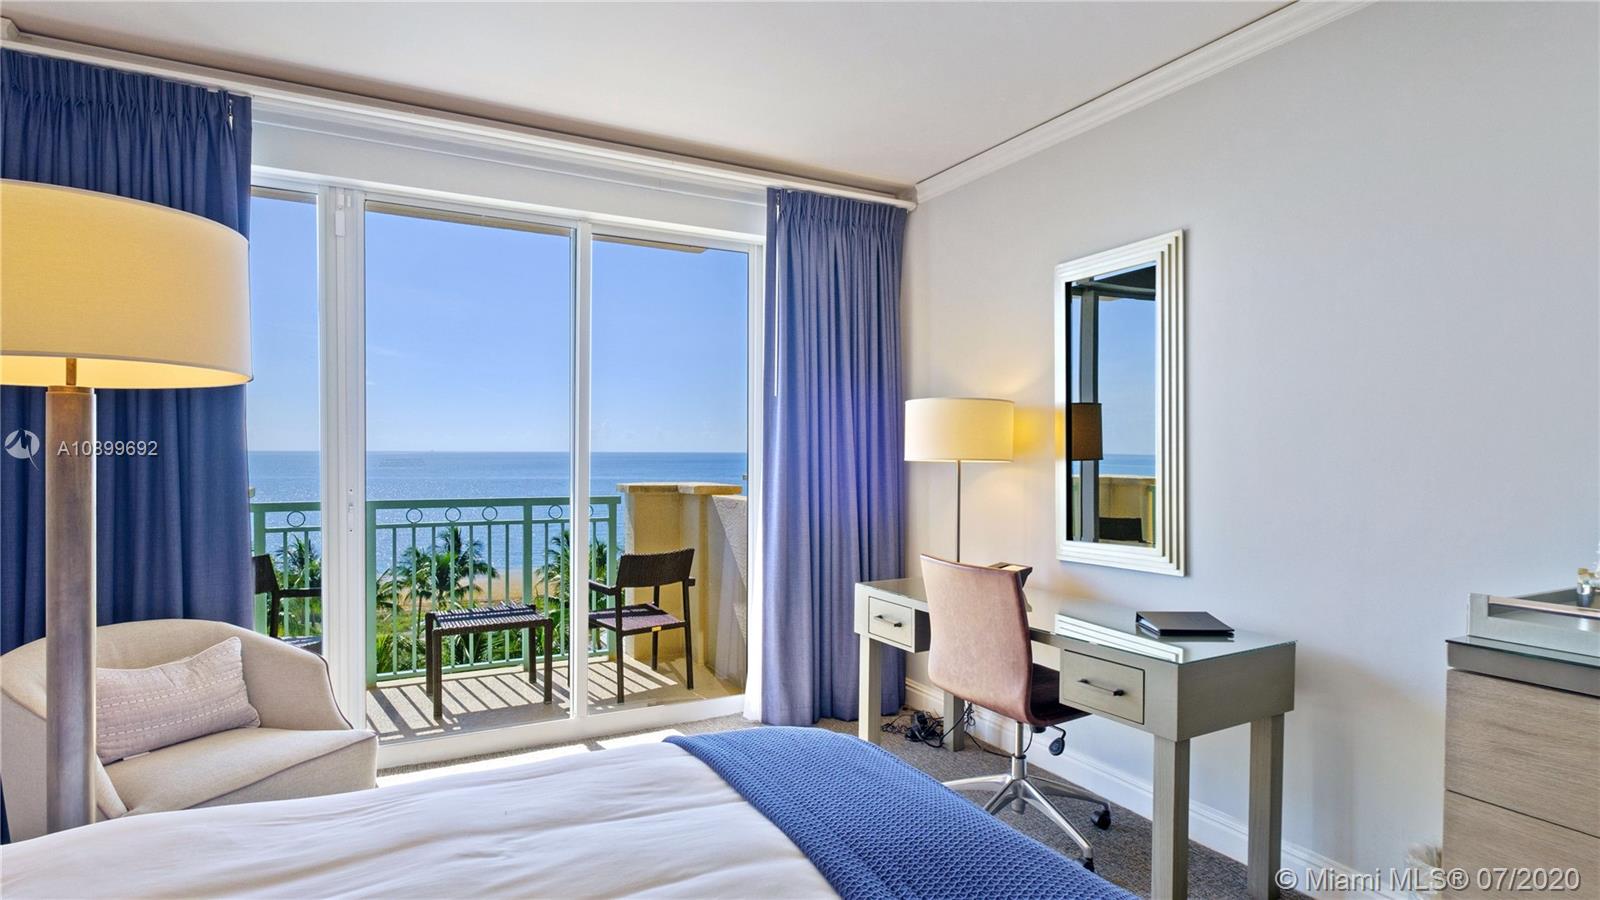 Take advantage of this great opportunity to RENT SHORT TERM an OCEAN FRONT STUDIO AT THE RITZ-CARLTON HOTEL in Key Biscayne. This unit has been renovated and is fully furnished with high end finishes. Enjoy your vacation in this luxurious condo hotel residence while having access to all of the hotel amenities.
Contact listing agent for availability.